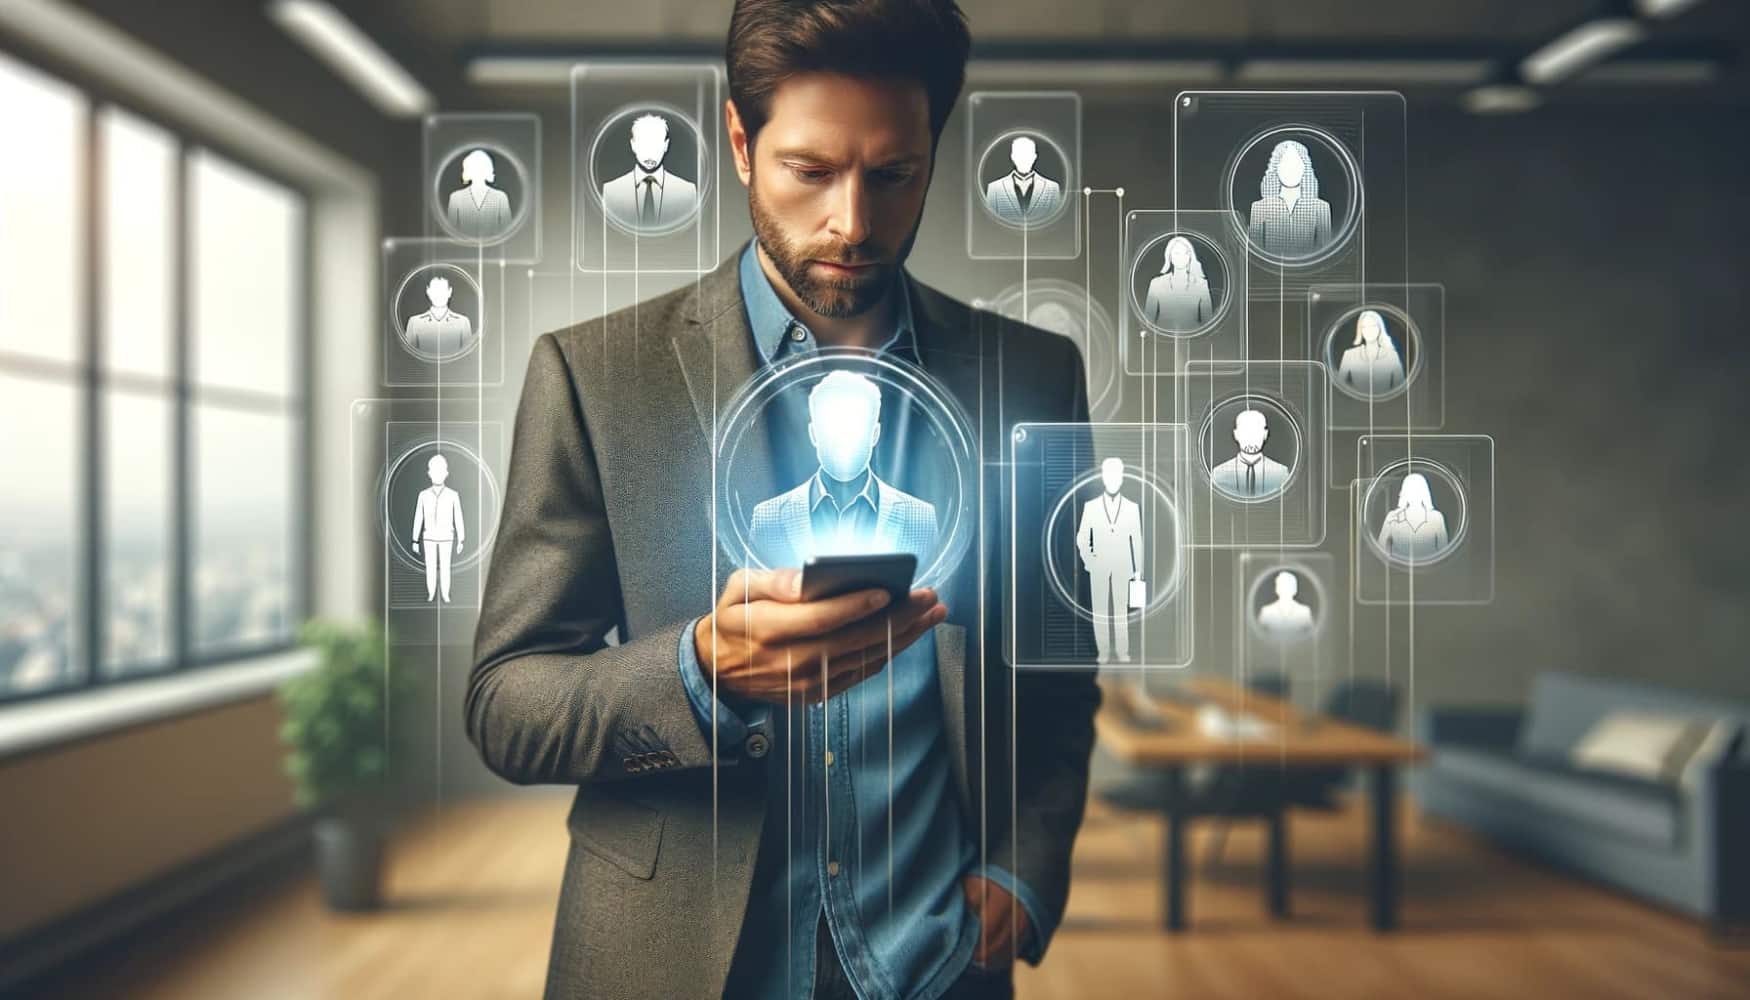 A man stands in a room dressed in a suit looking at a cell phone and around him are icons of user profiles